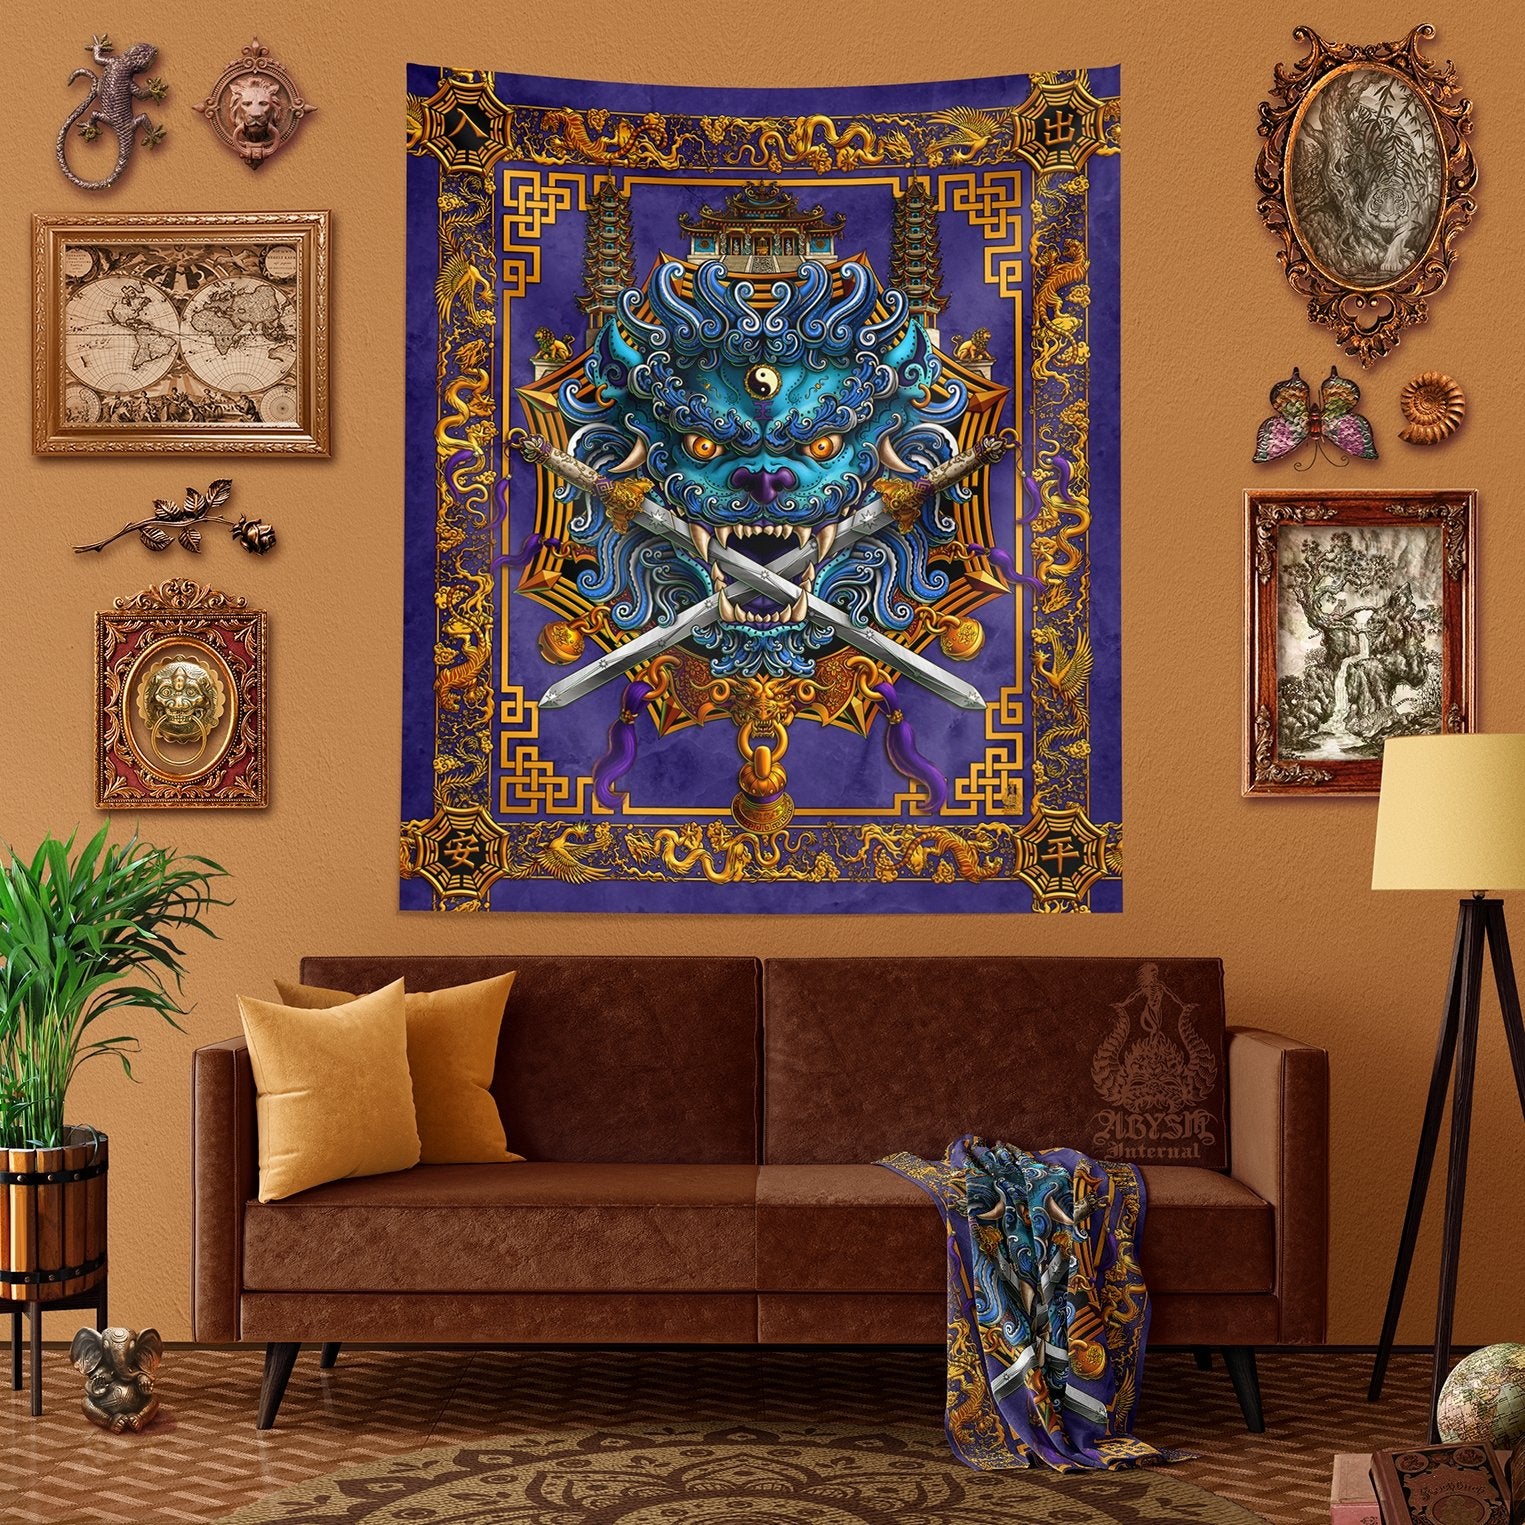 Lion Tapestry, Taiwan Sword Lion, Chinese Wall Hanging, Gamer Home Decor, Asian Mythology - Blue and Purple - Abysm Internal